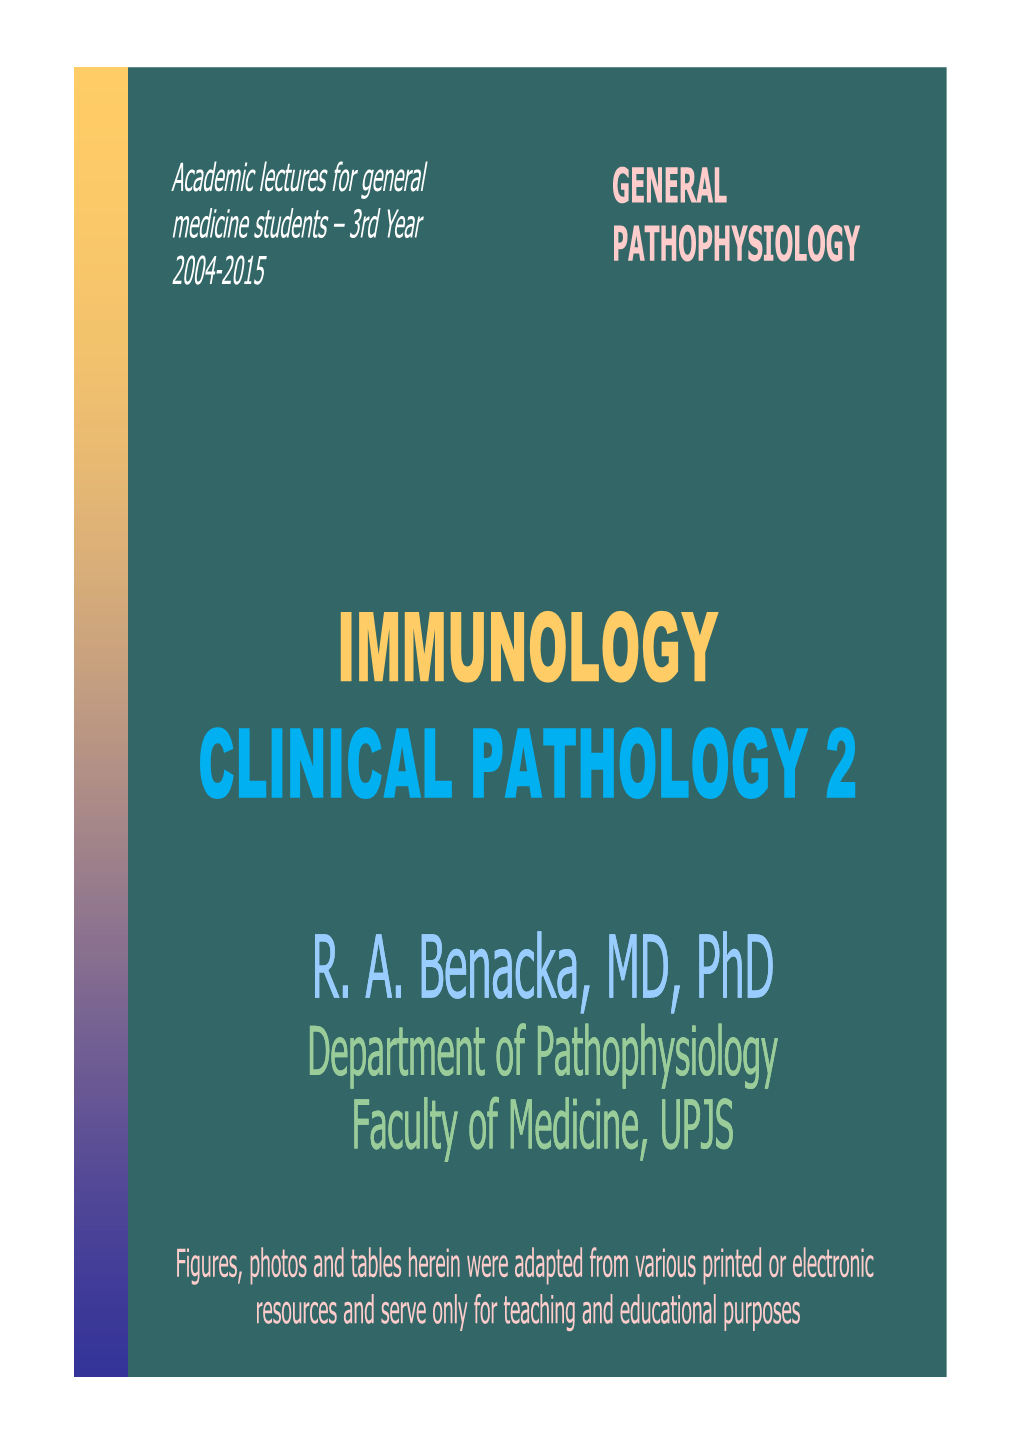 Benacka, MD, Phd Department of Pathophysiology Faculty of Medicine, UPJS